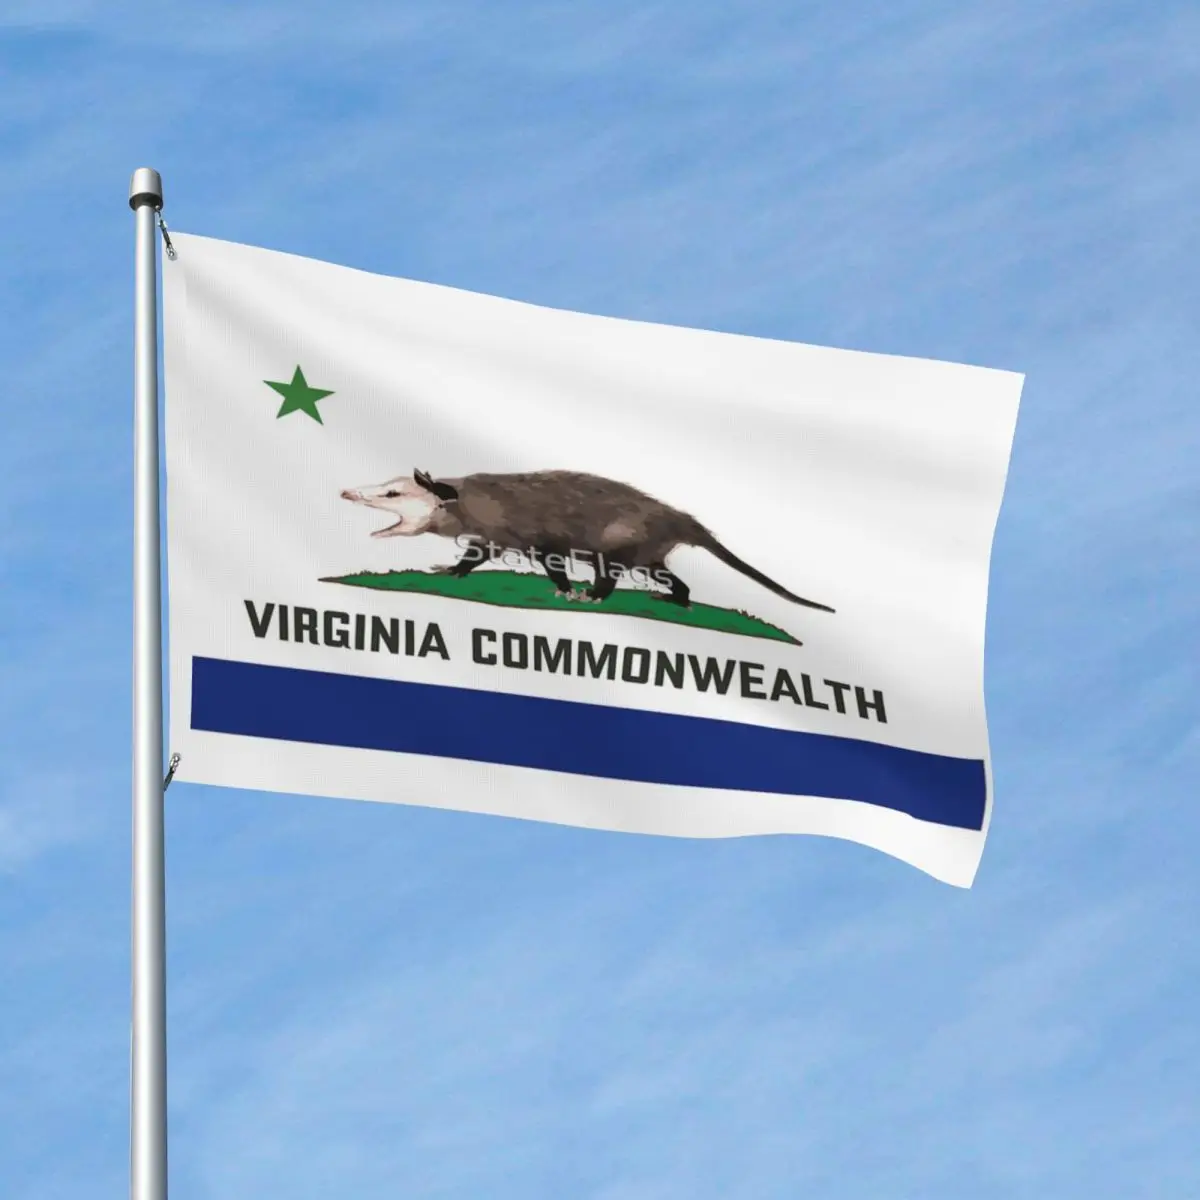 

Virginia Commonwealth Flag Vintage Easy To Hang Vibrant Colors Soft Fabric Flowy Bright Customizable